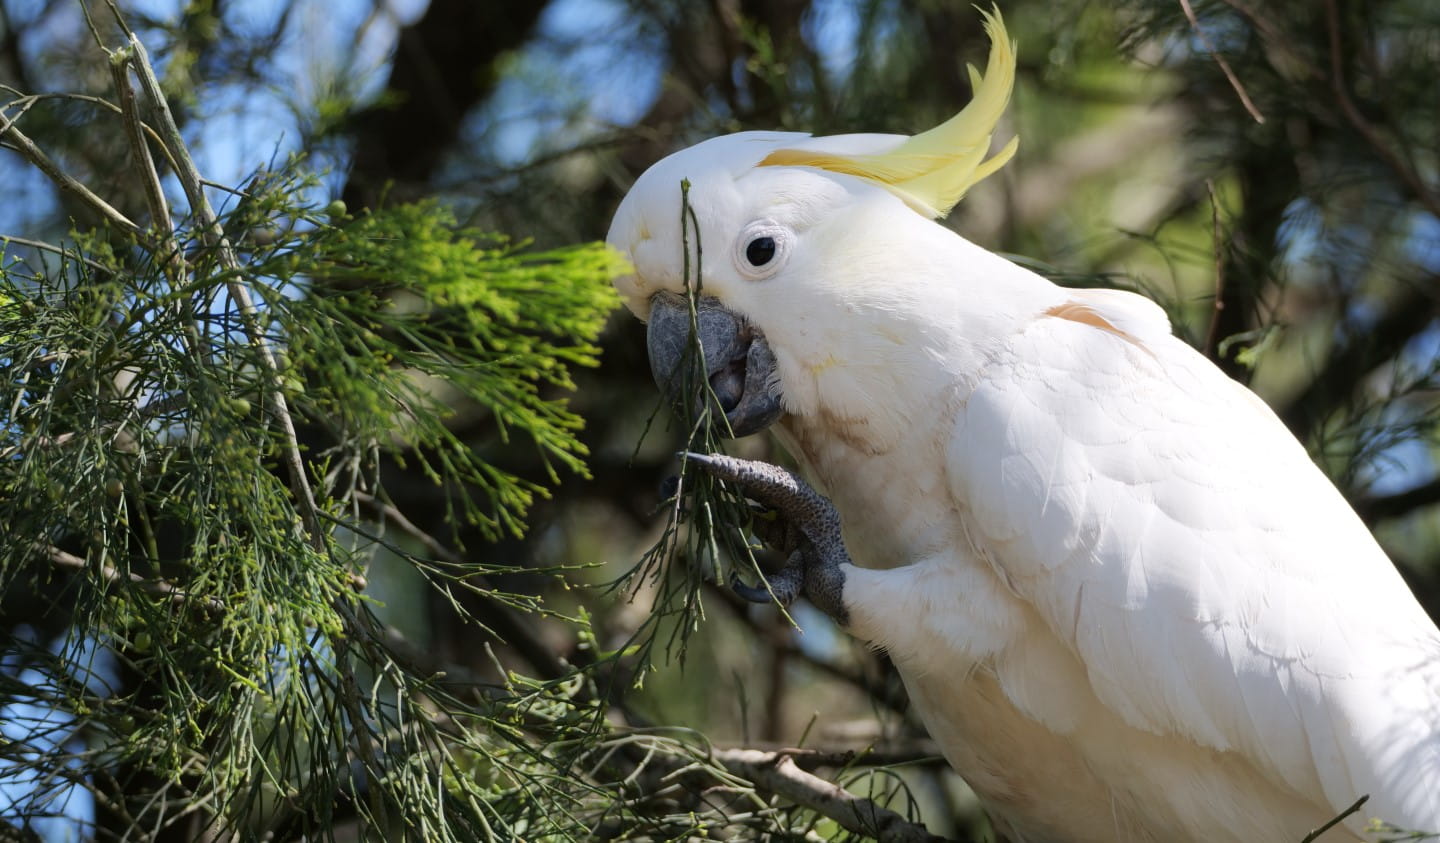 A Sulphur-Crested Cockatoo having a leafy snack.